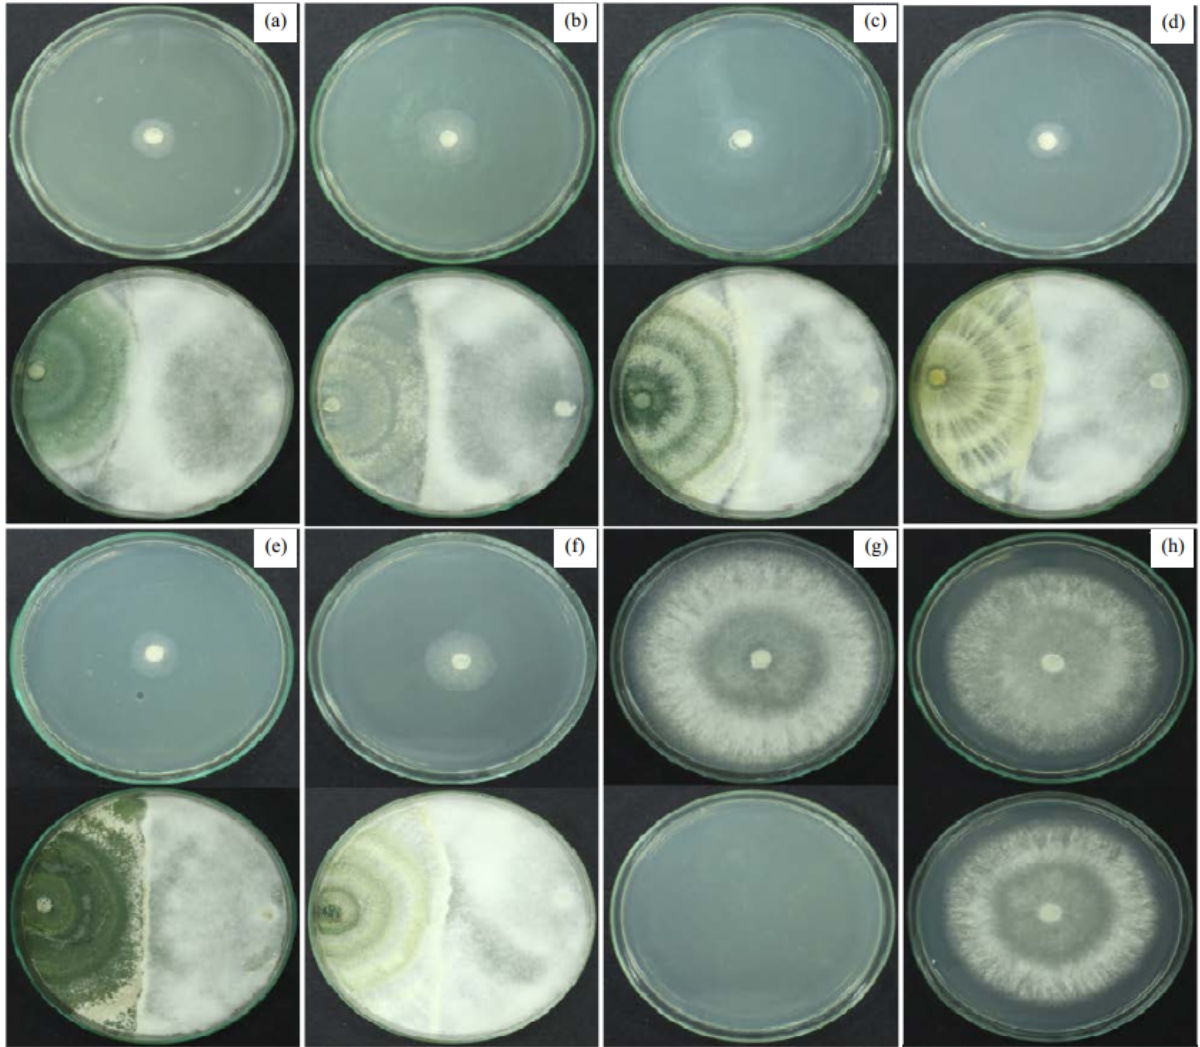 Image for - Mycelial Inhibition of Sclerotinia sclerotiorum by Trichoderma spp. Volatile Organic Compounds in Distinct Stages of Development